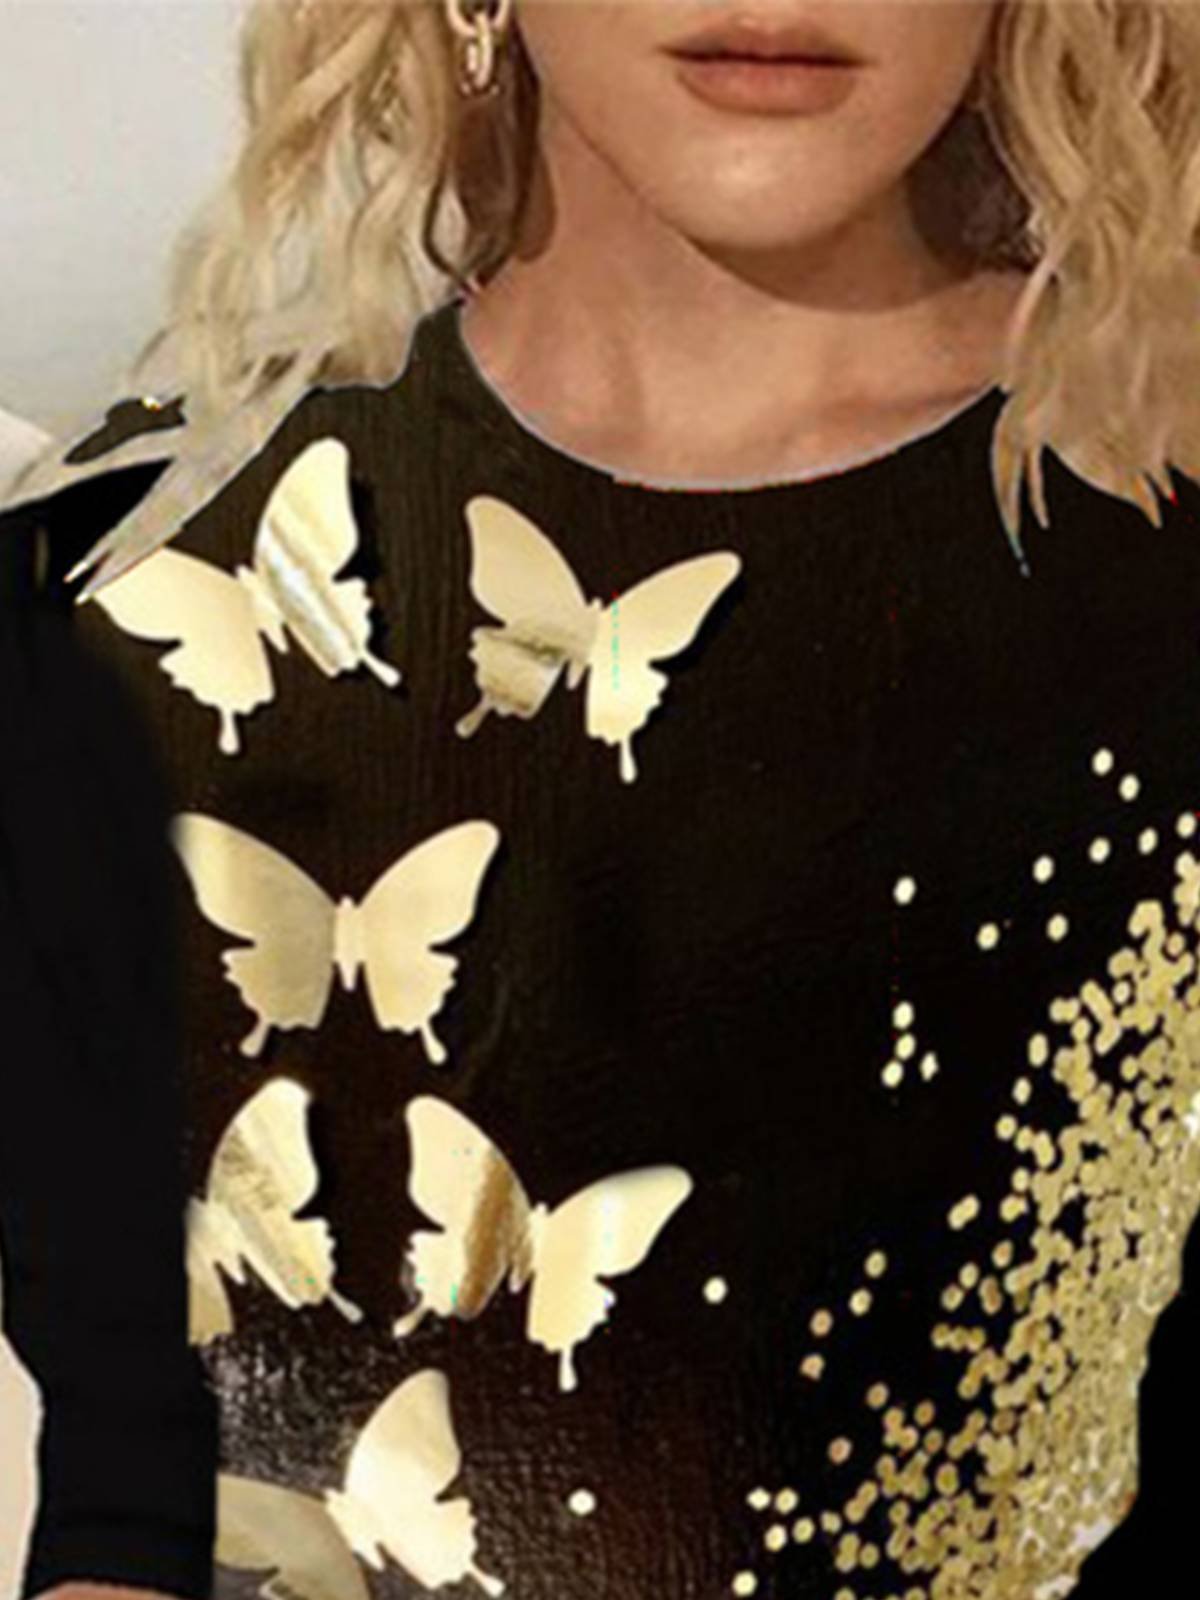 Butterfly Fit Casual Crew Neck Top